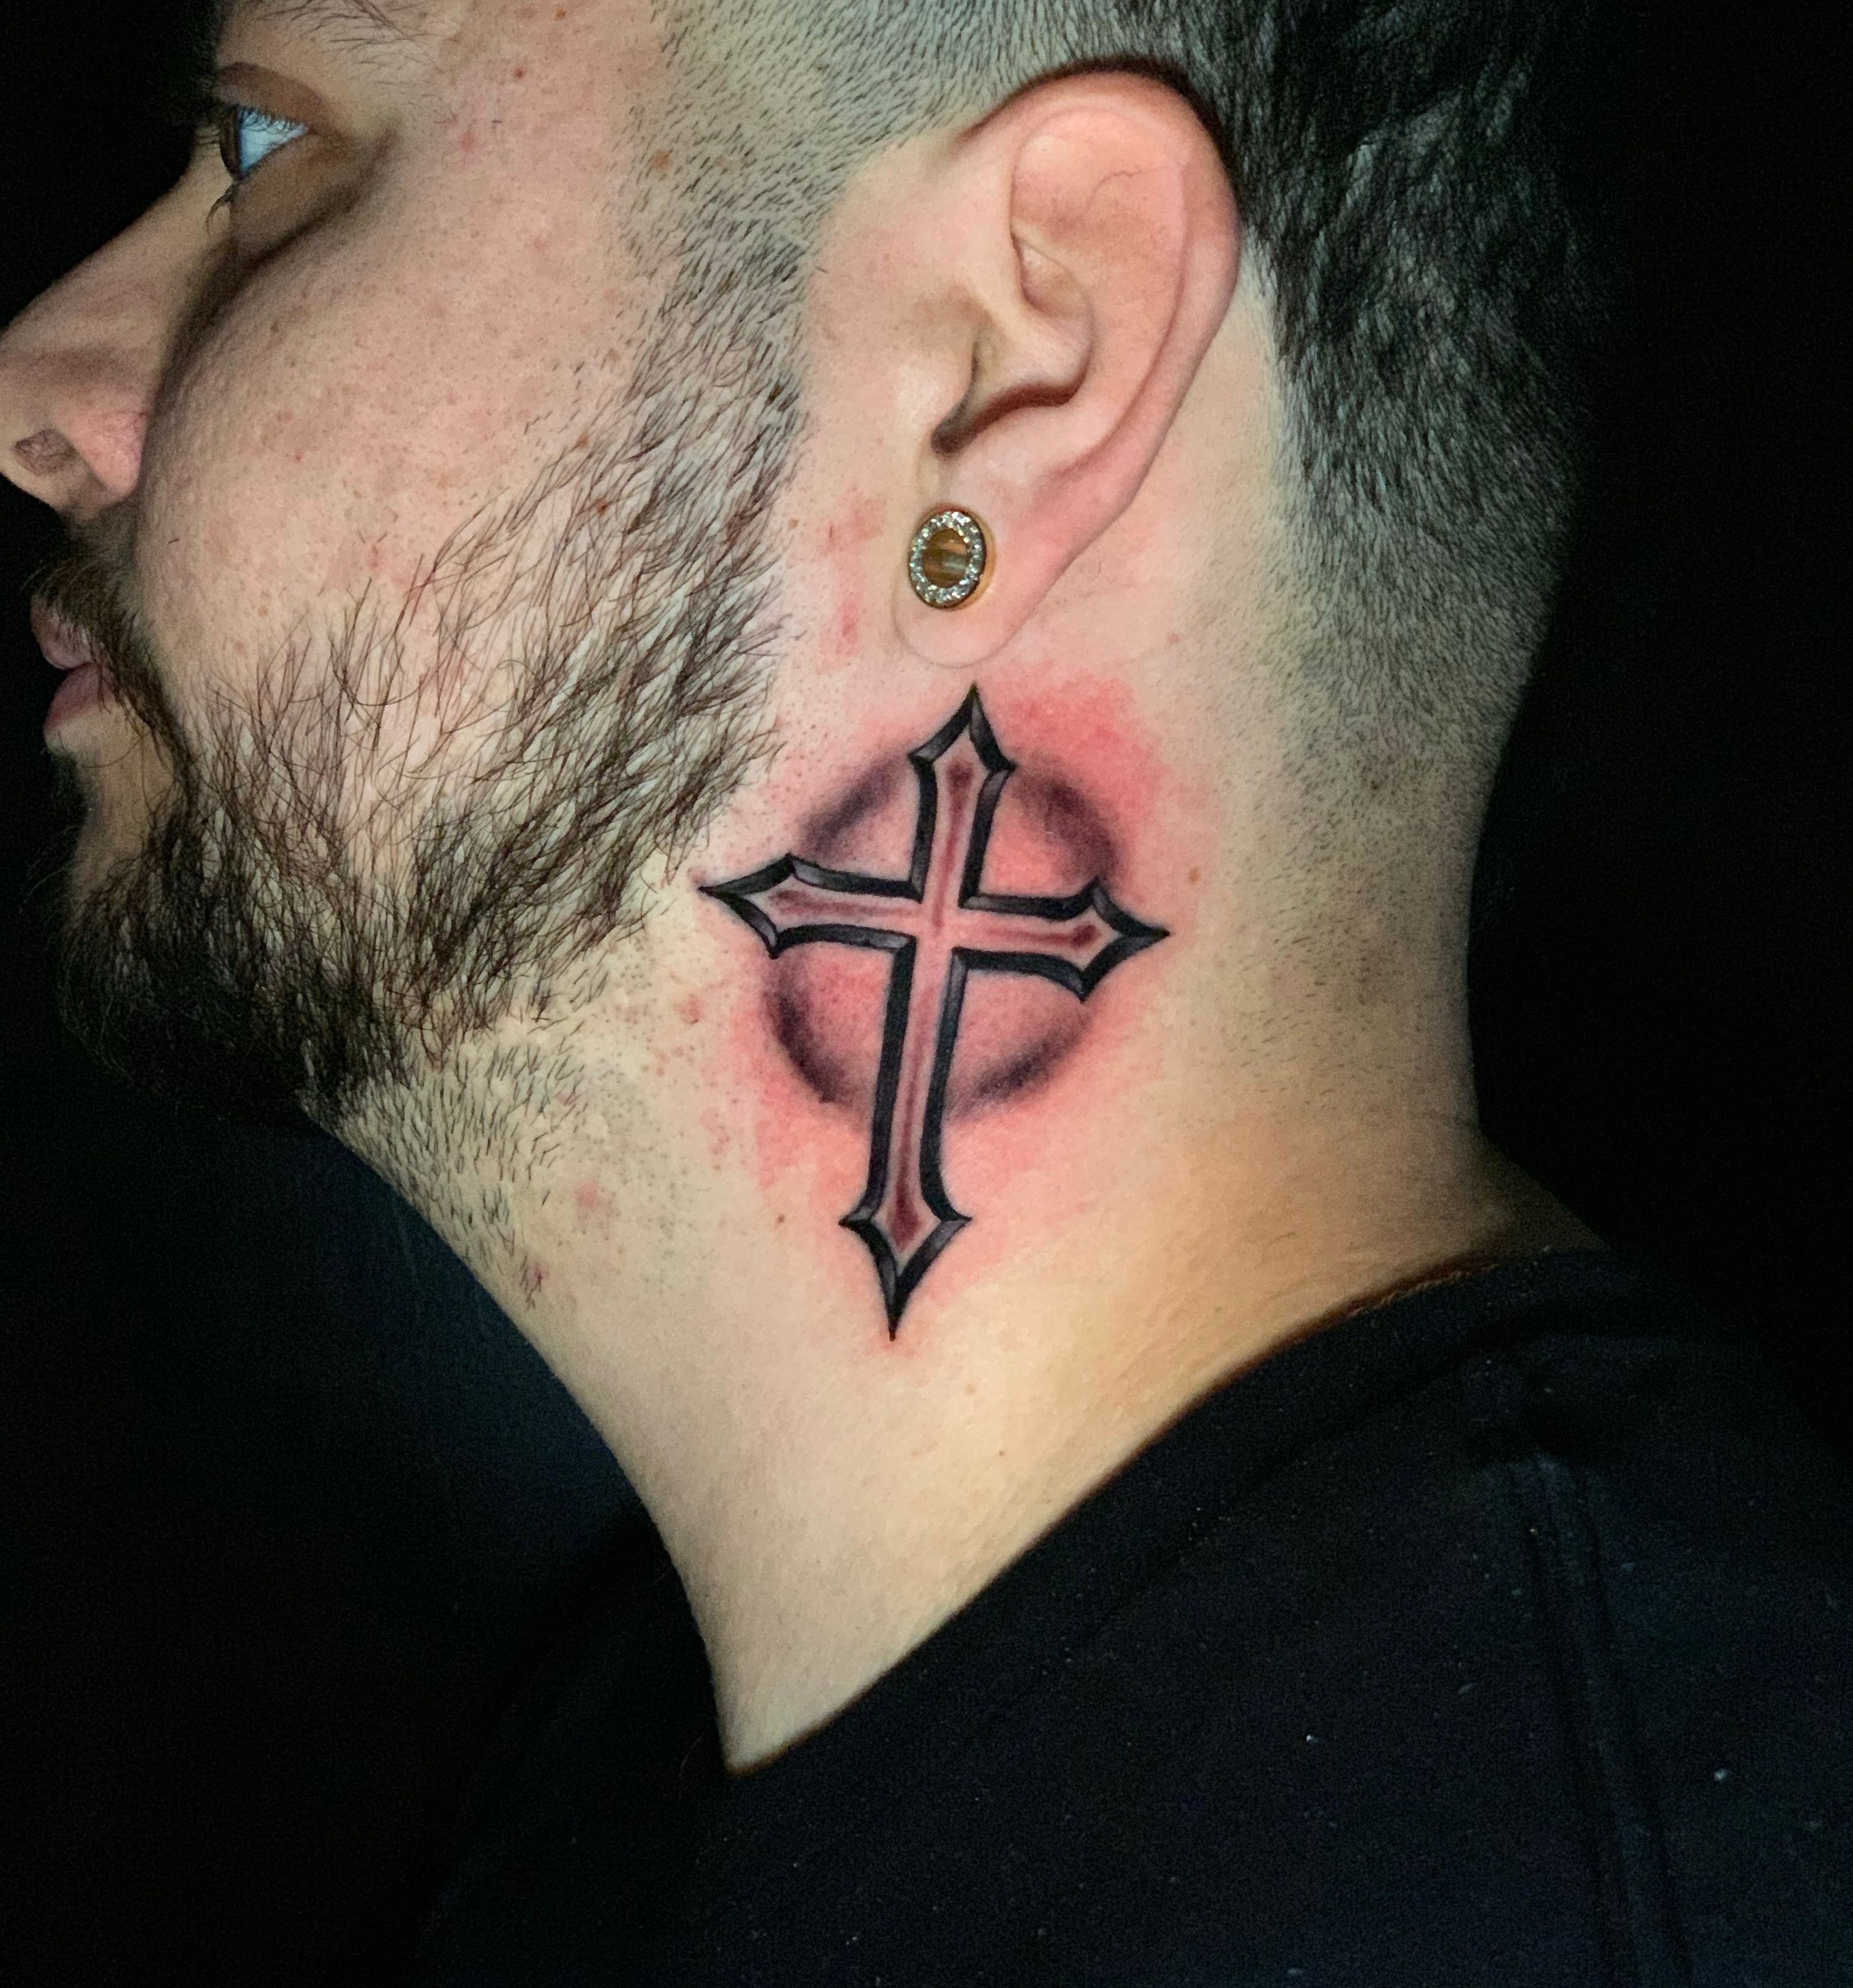 100 Celtic Cross Tattoo Designs with Meaning | Art and Design